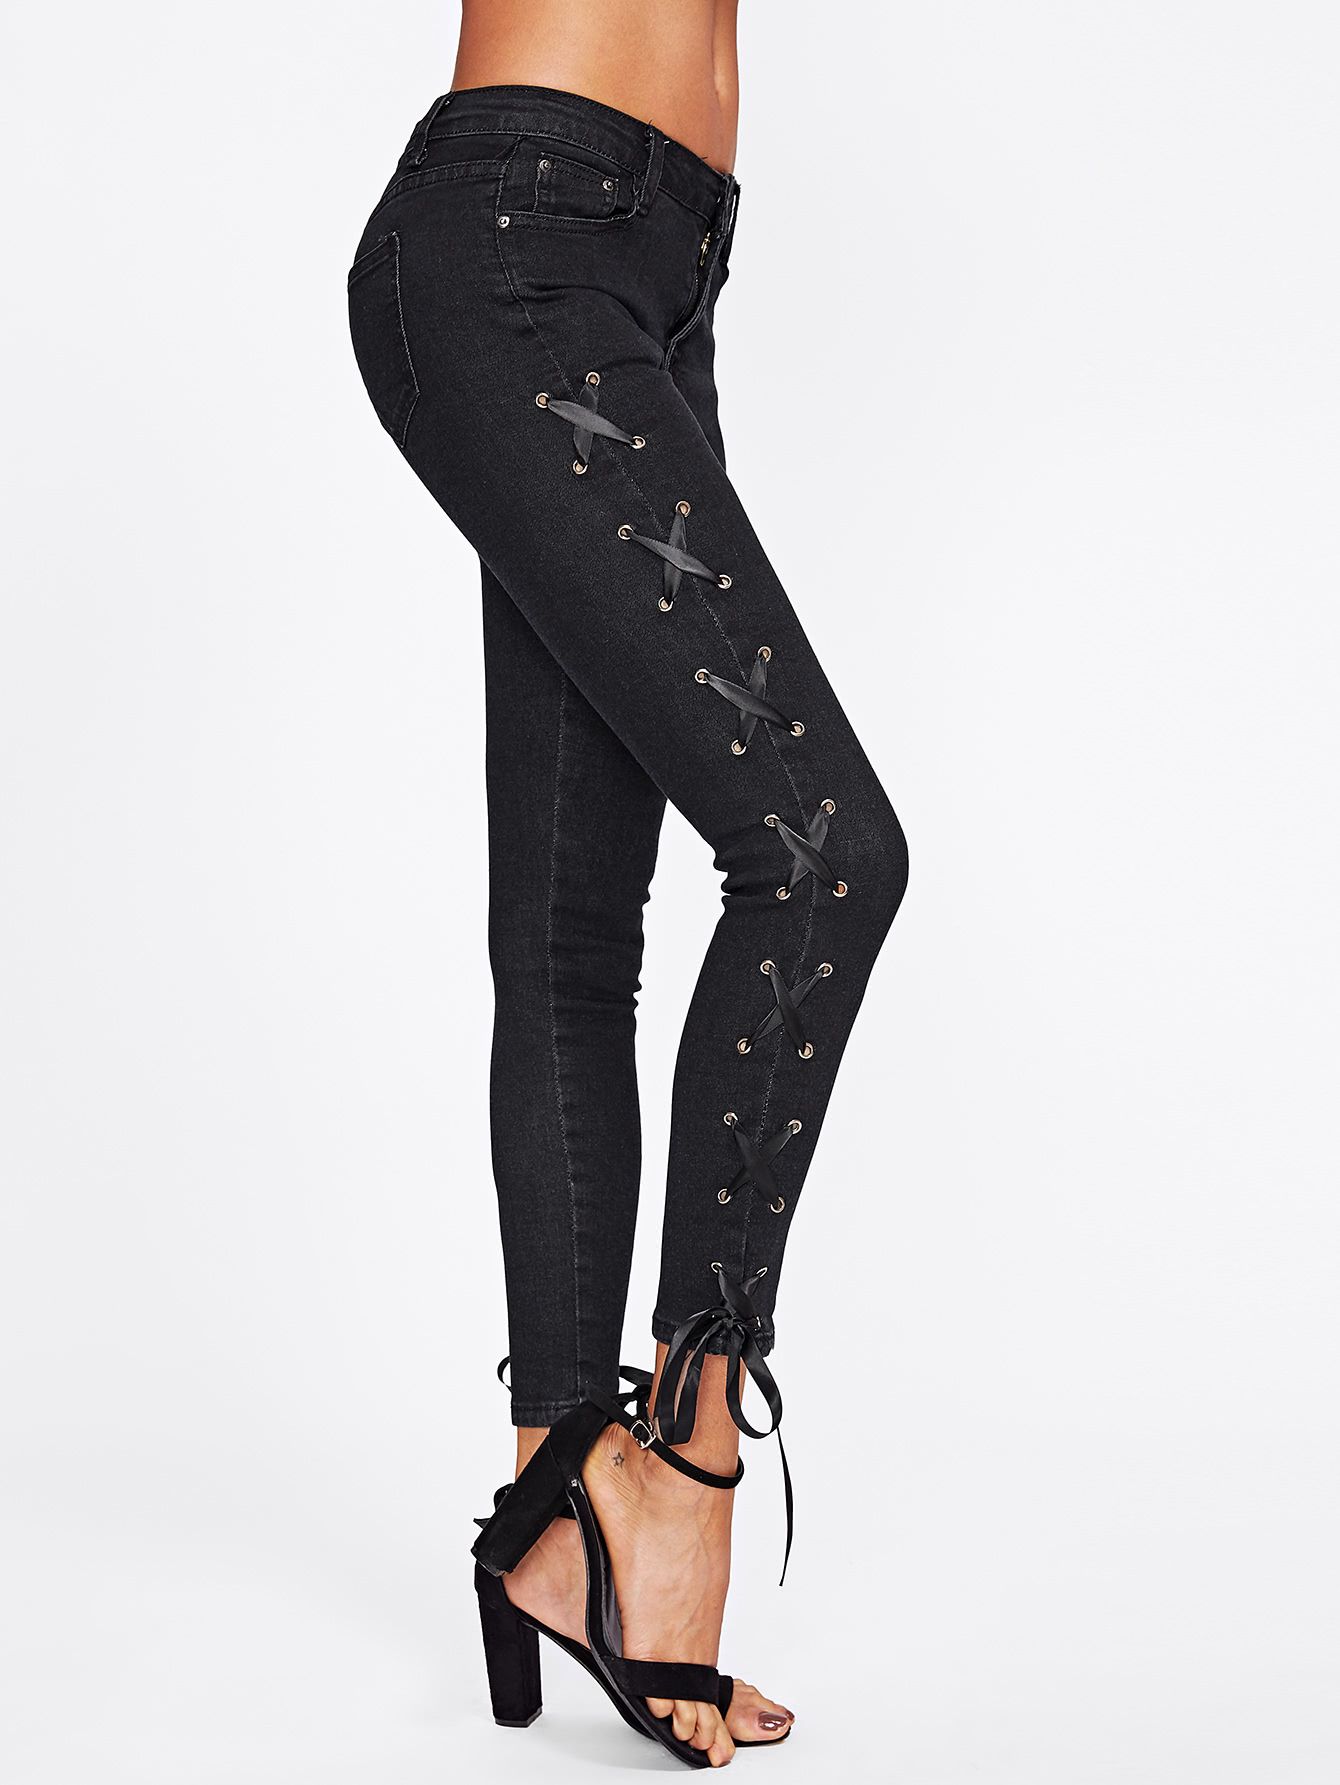 Grommet Lace Up Side Skinny Ankle Jeans | SHEIN